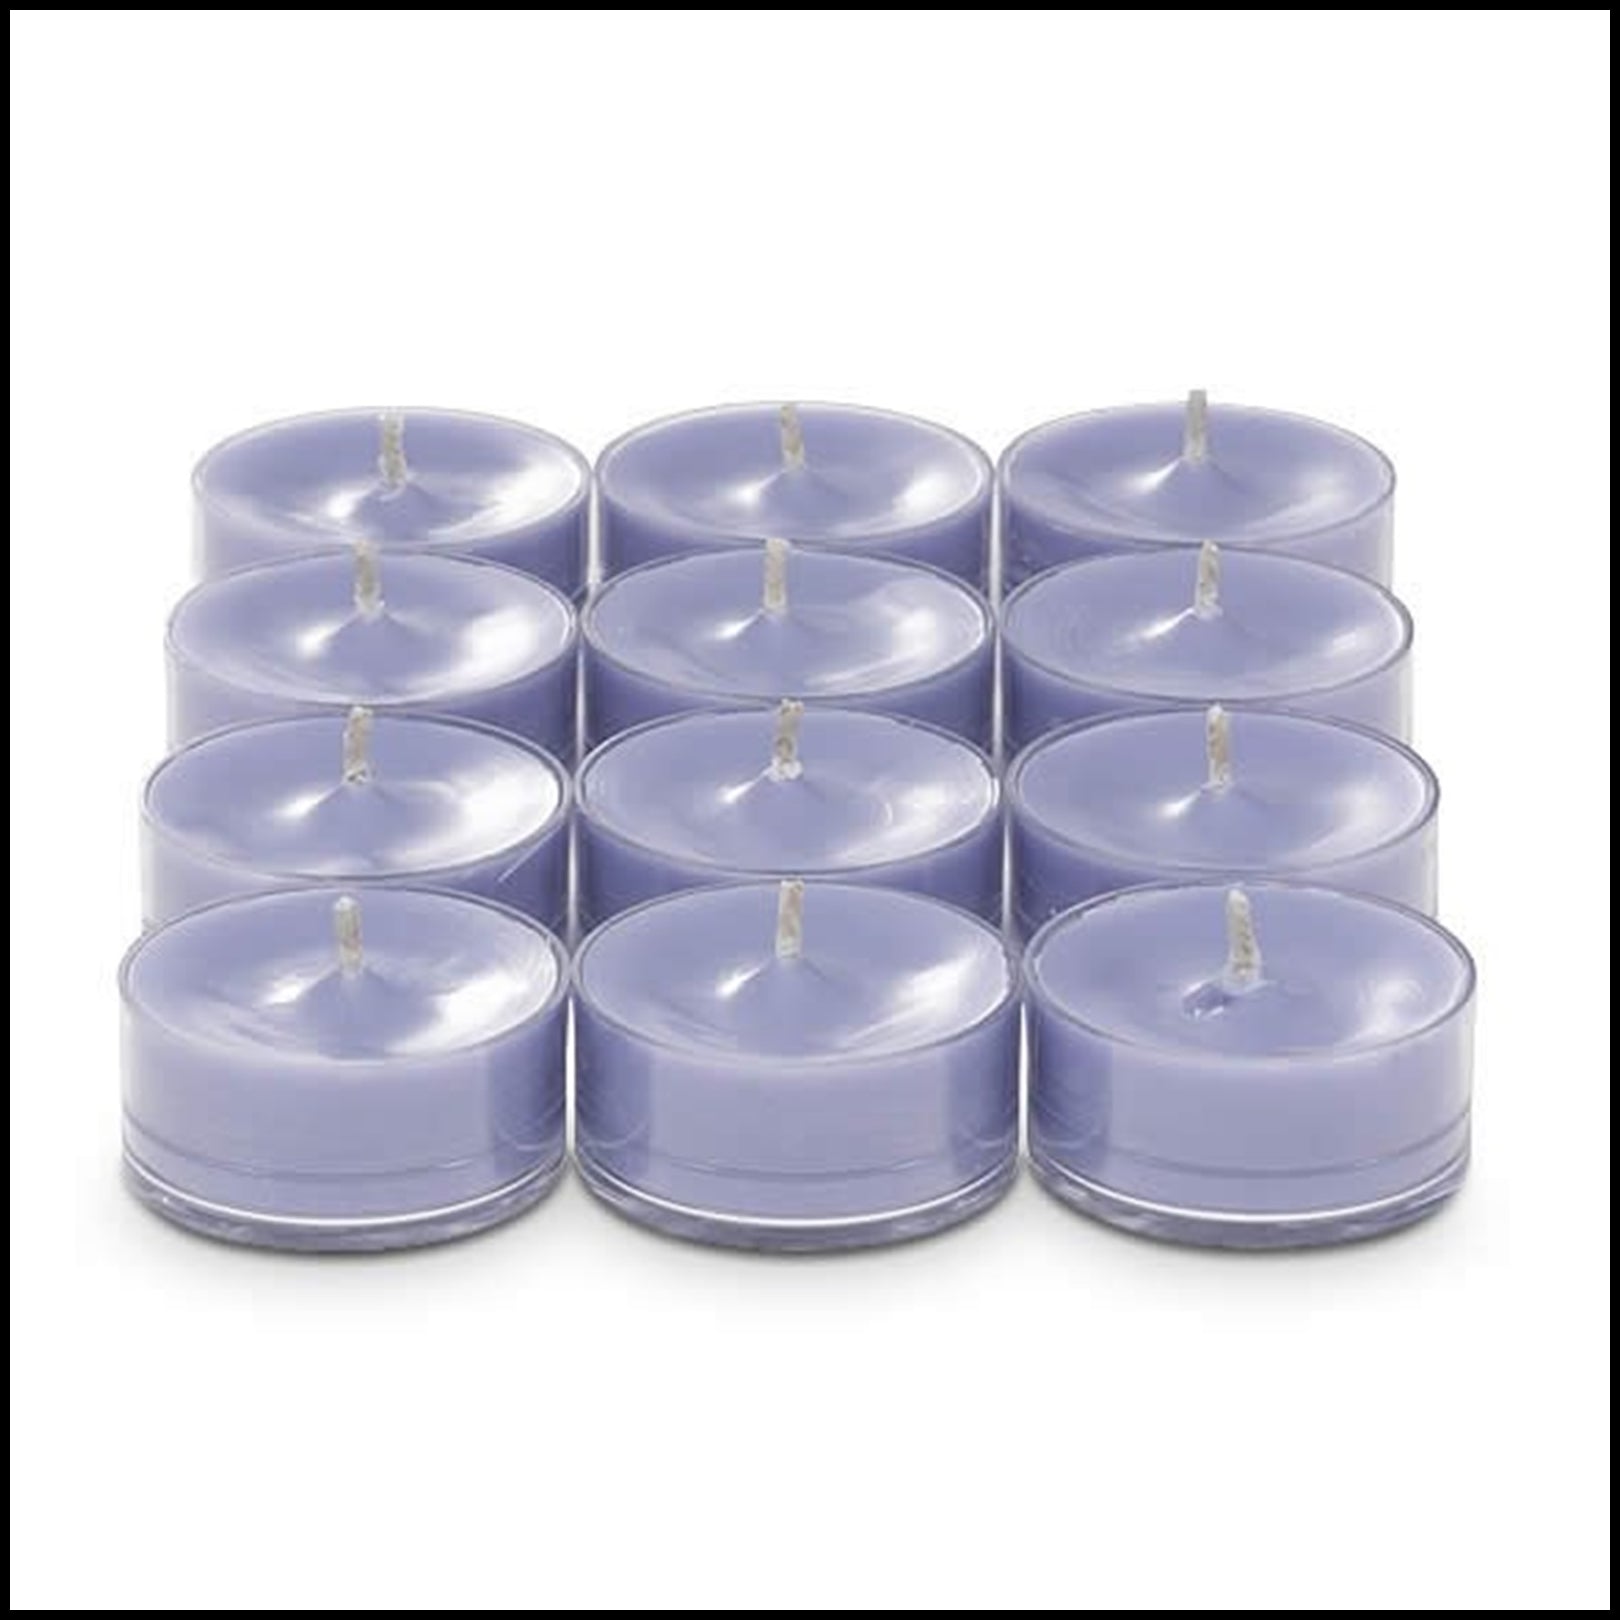 PartyLite Tealight Candles - 1 Box - 1 Dozen Tealights - 12 CANDLES BE RELAXED